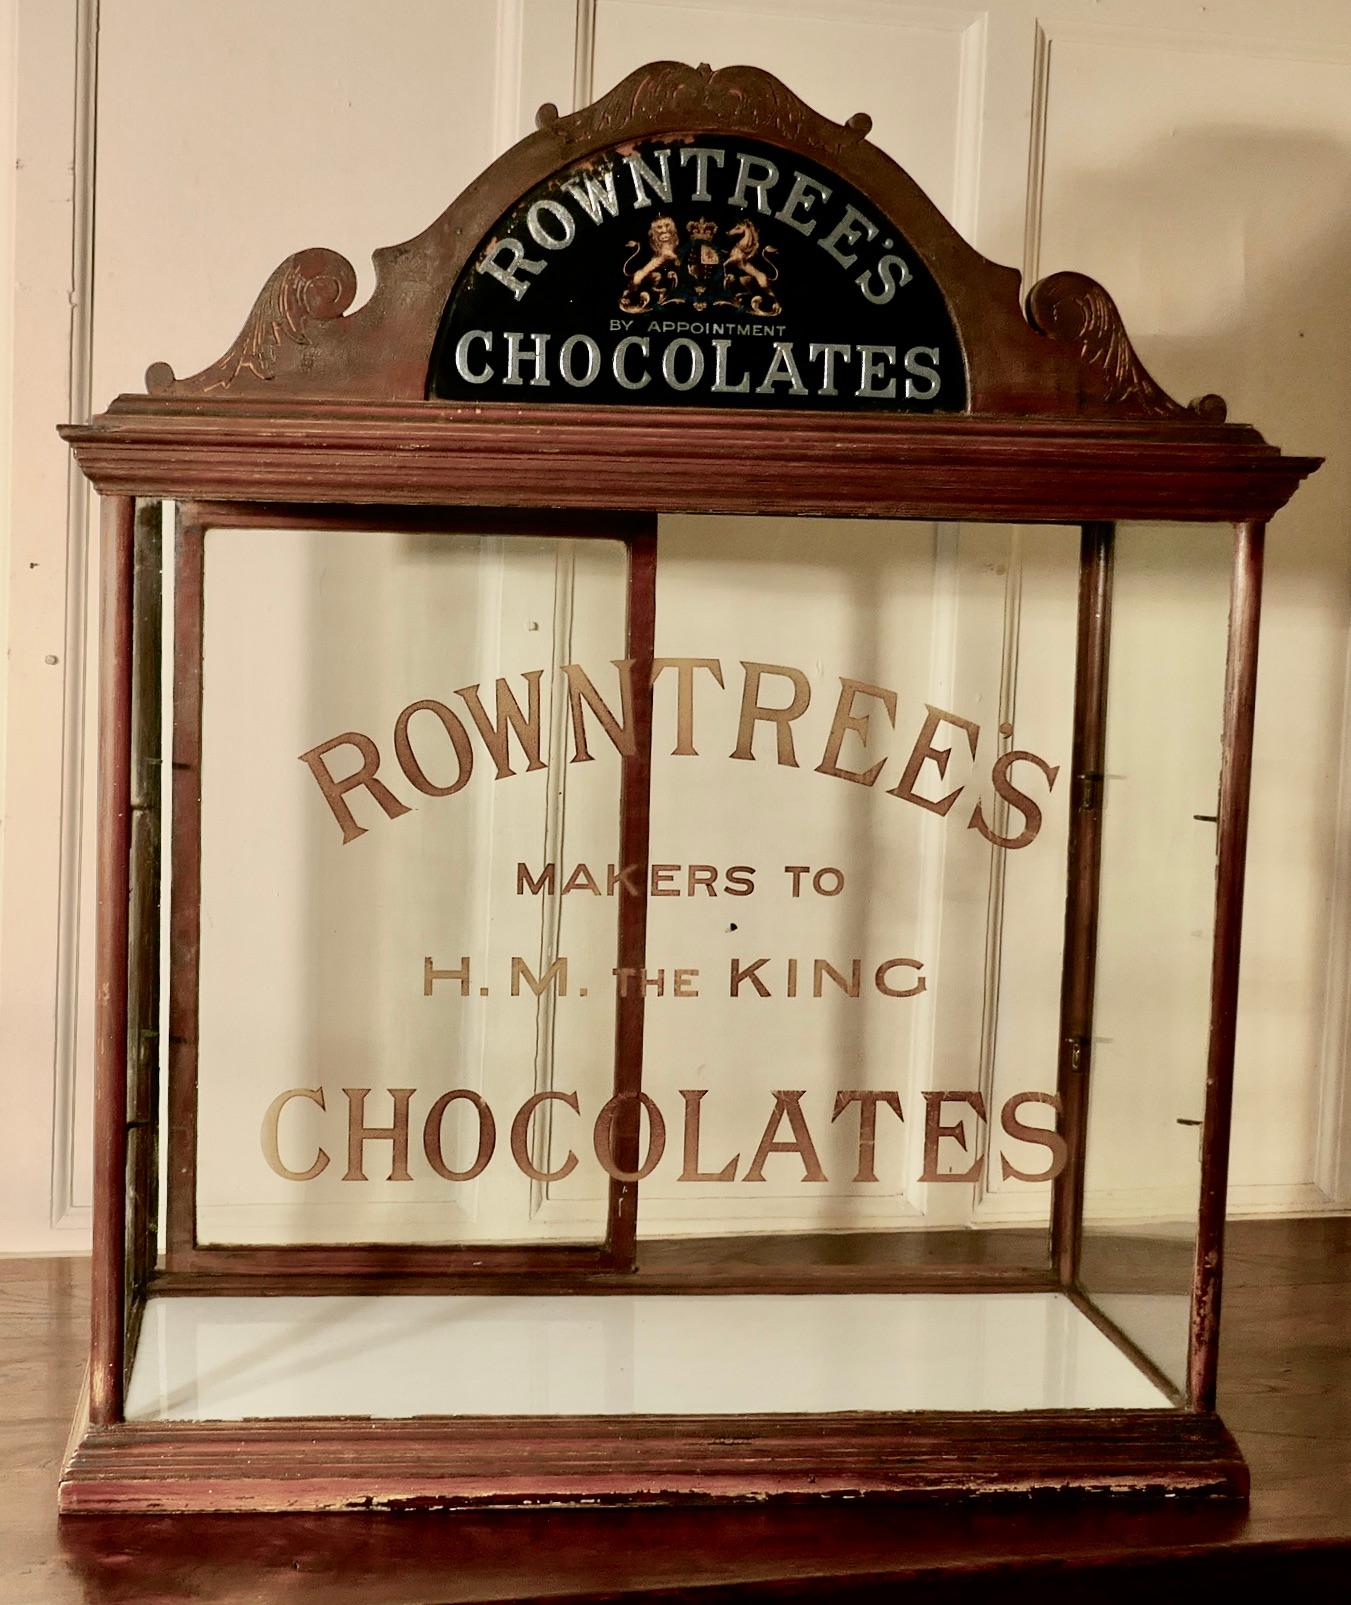 Rowntree’s Sweet shop display cabinet 

Advertising Shop Display Cabinet the cabinet has a rather grand carved cornice with a mirrored Royal Appointment sign and Chocolates in Gold and Silver
The Glass on the front of the cabinet is painted and